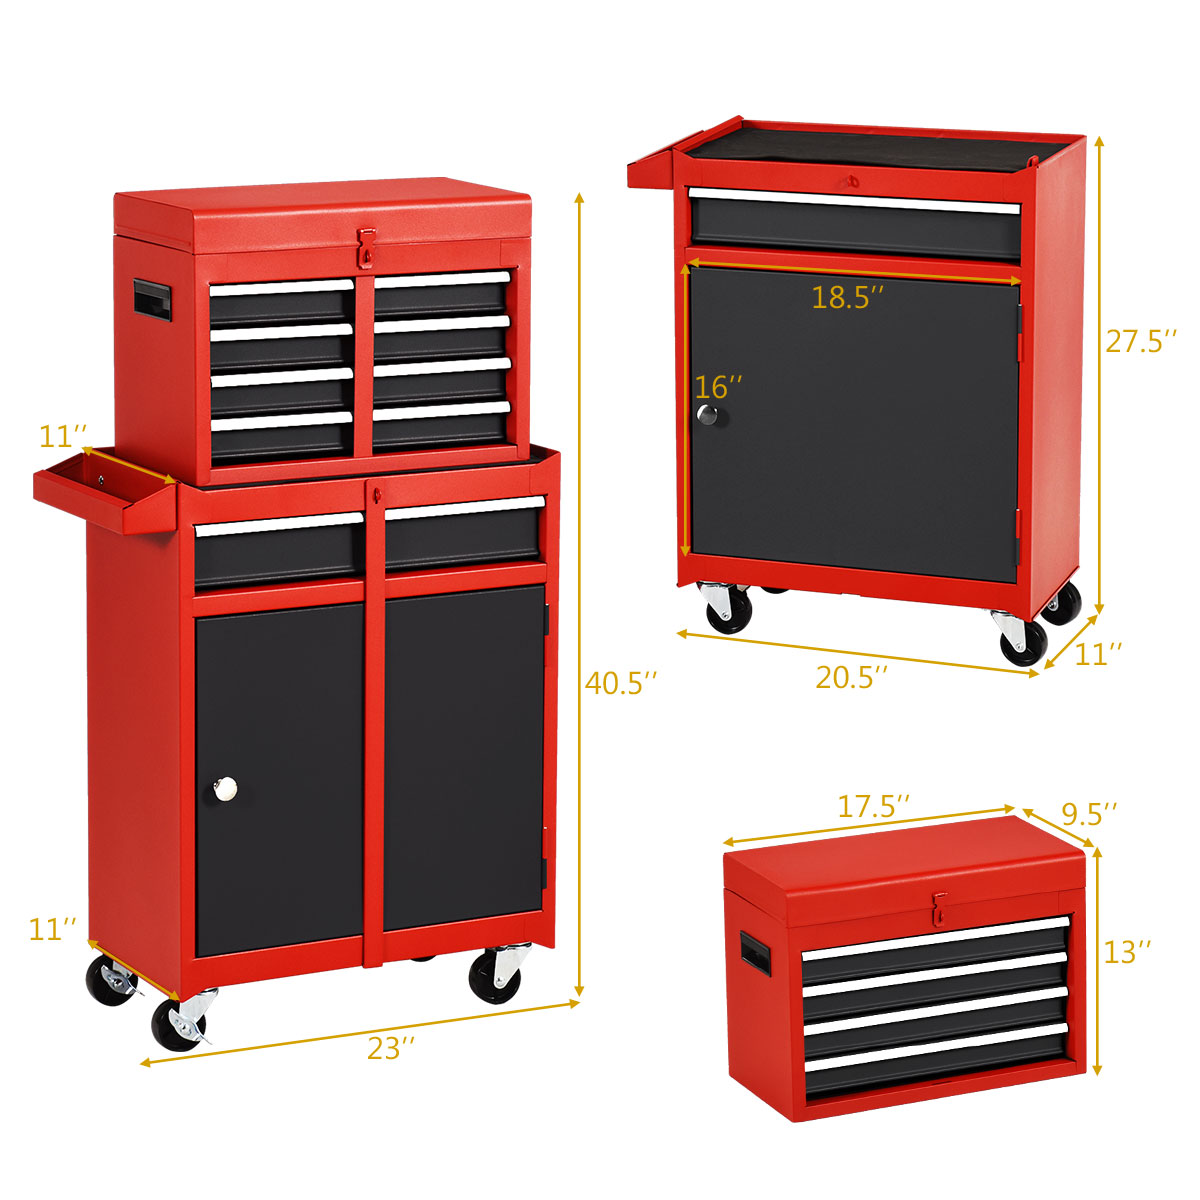 Costway 2 in 1 Tool Chest & Cabinet with 5 Sliding Drawers Rolling Garage Box Organizer - image 3 of 10